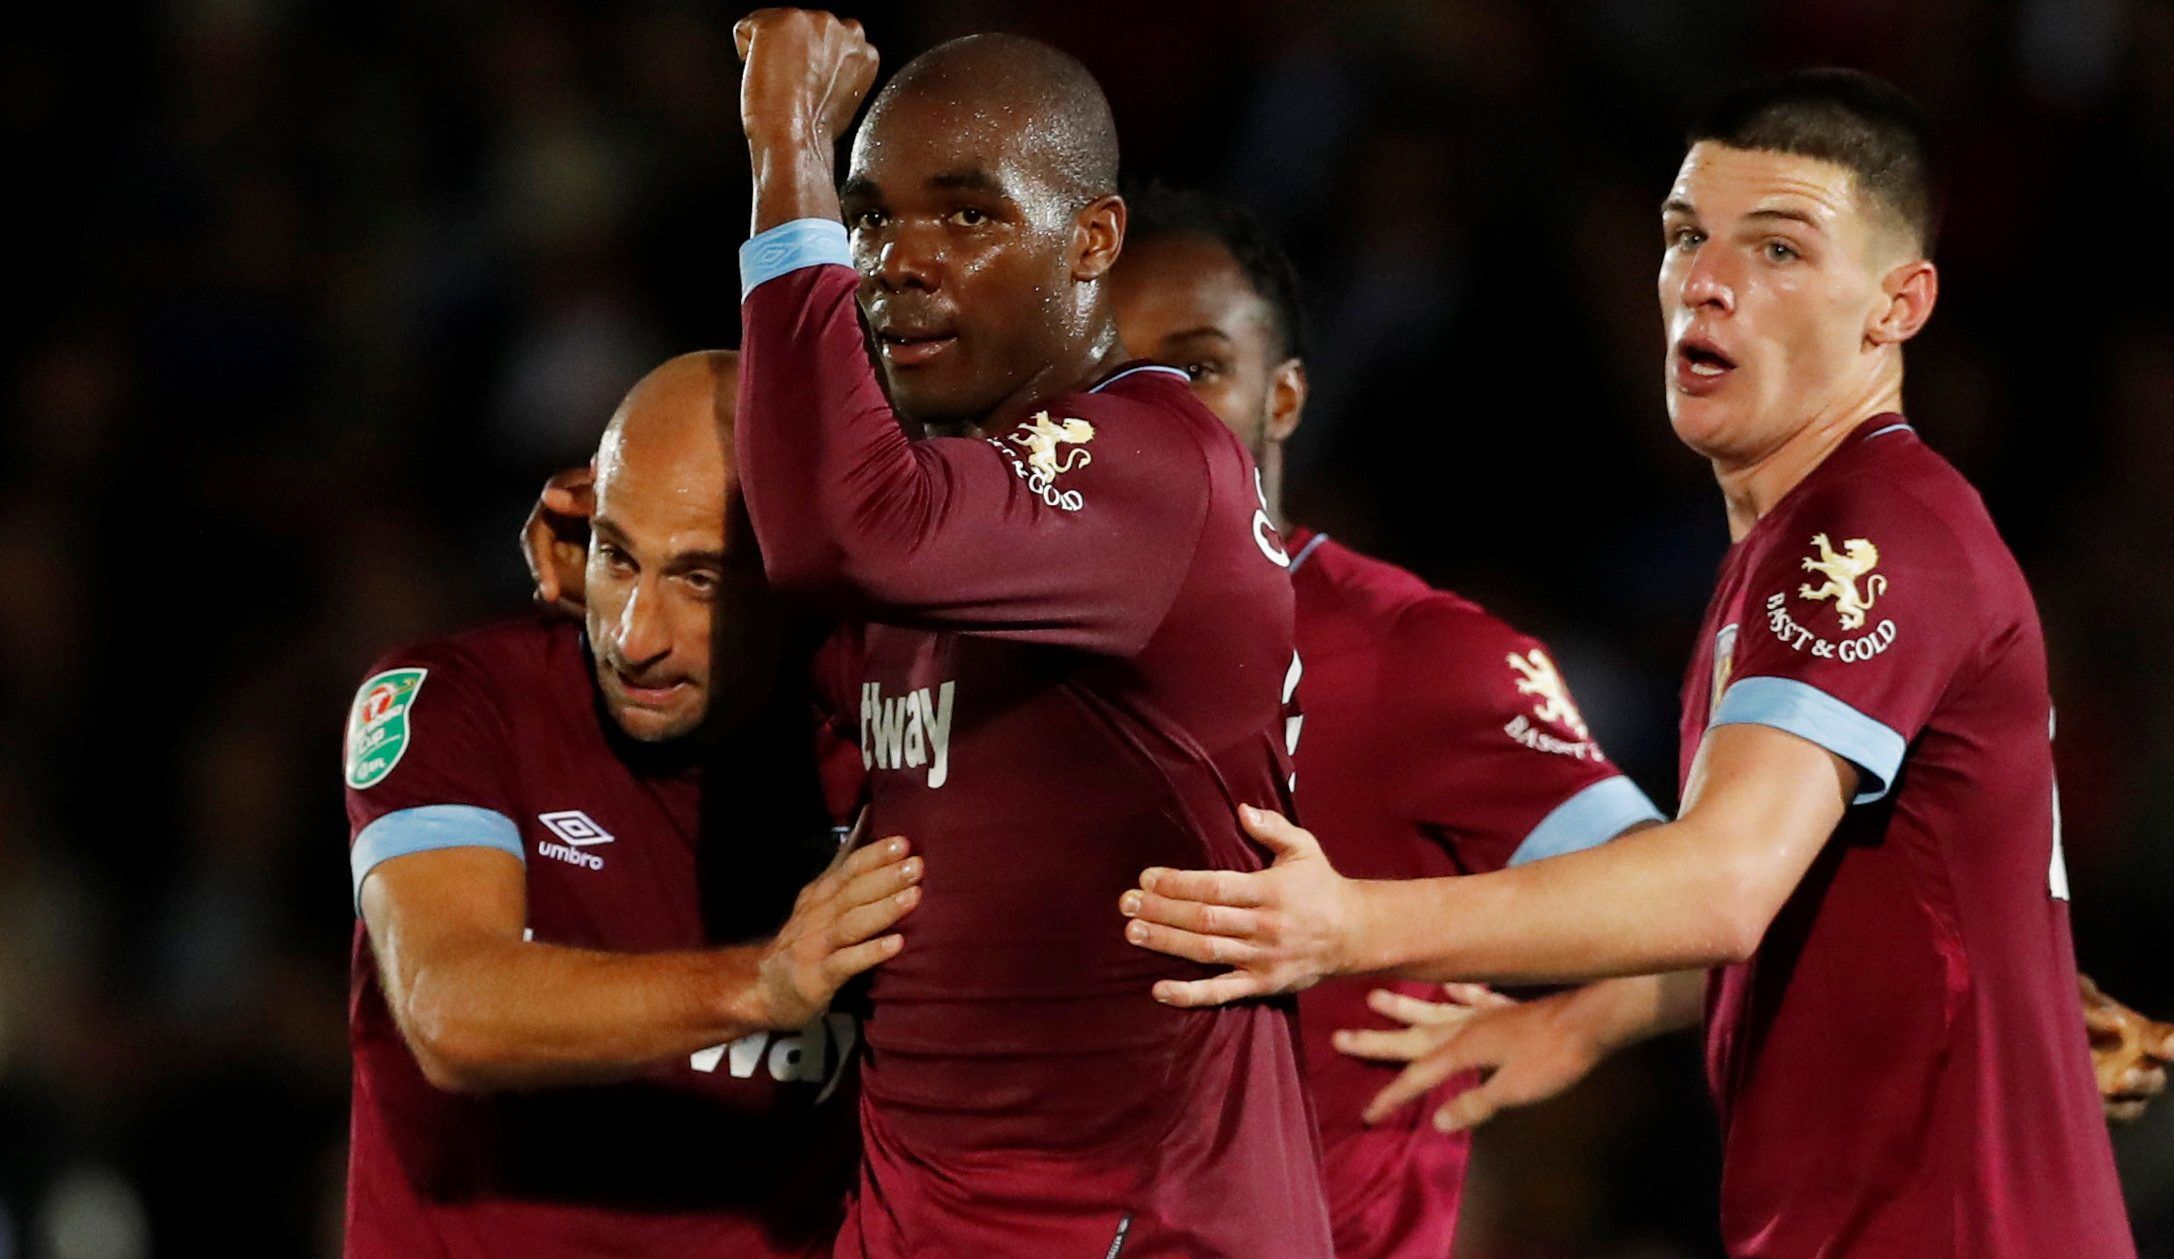 Soccer Football - Carabao Cup Second Round - AFC Wimbledon v West Ham United - The Cherry Red Records Stadium, London, Britain - August 28, 2018  West Ham's Angelo Ogbonna celebrates scoring their second goal with team mates    Action Images via Reuters/Matthew Childs  EDITORIAL USE ONLY. No use with unauthorized audio, video, data, fixture lists, club/league logos or 